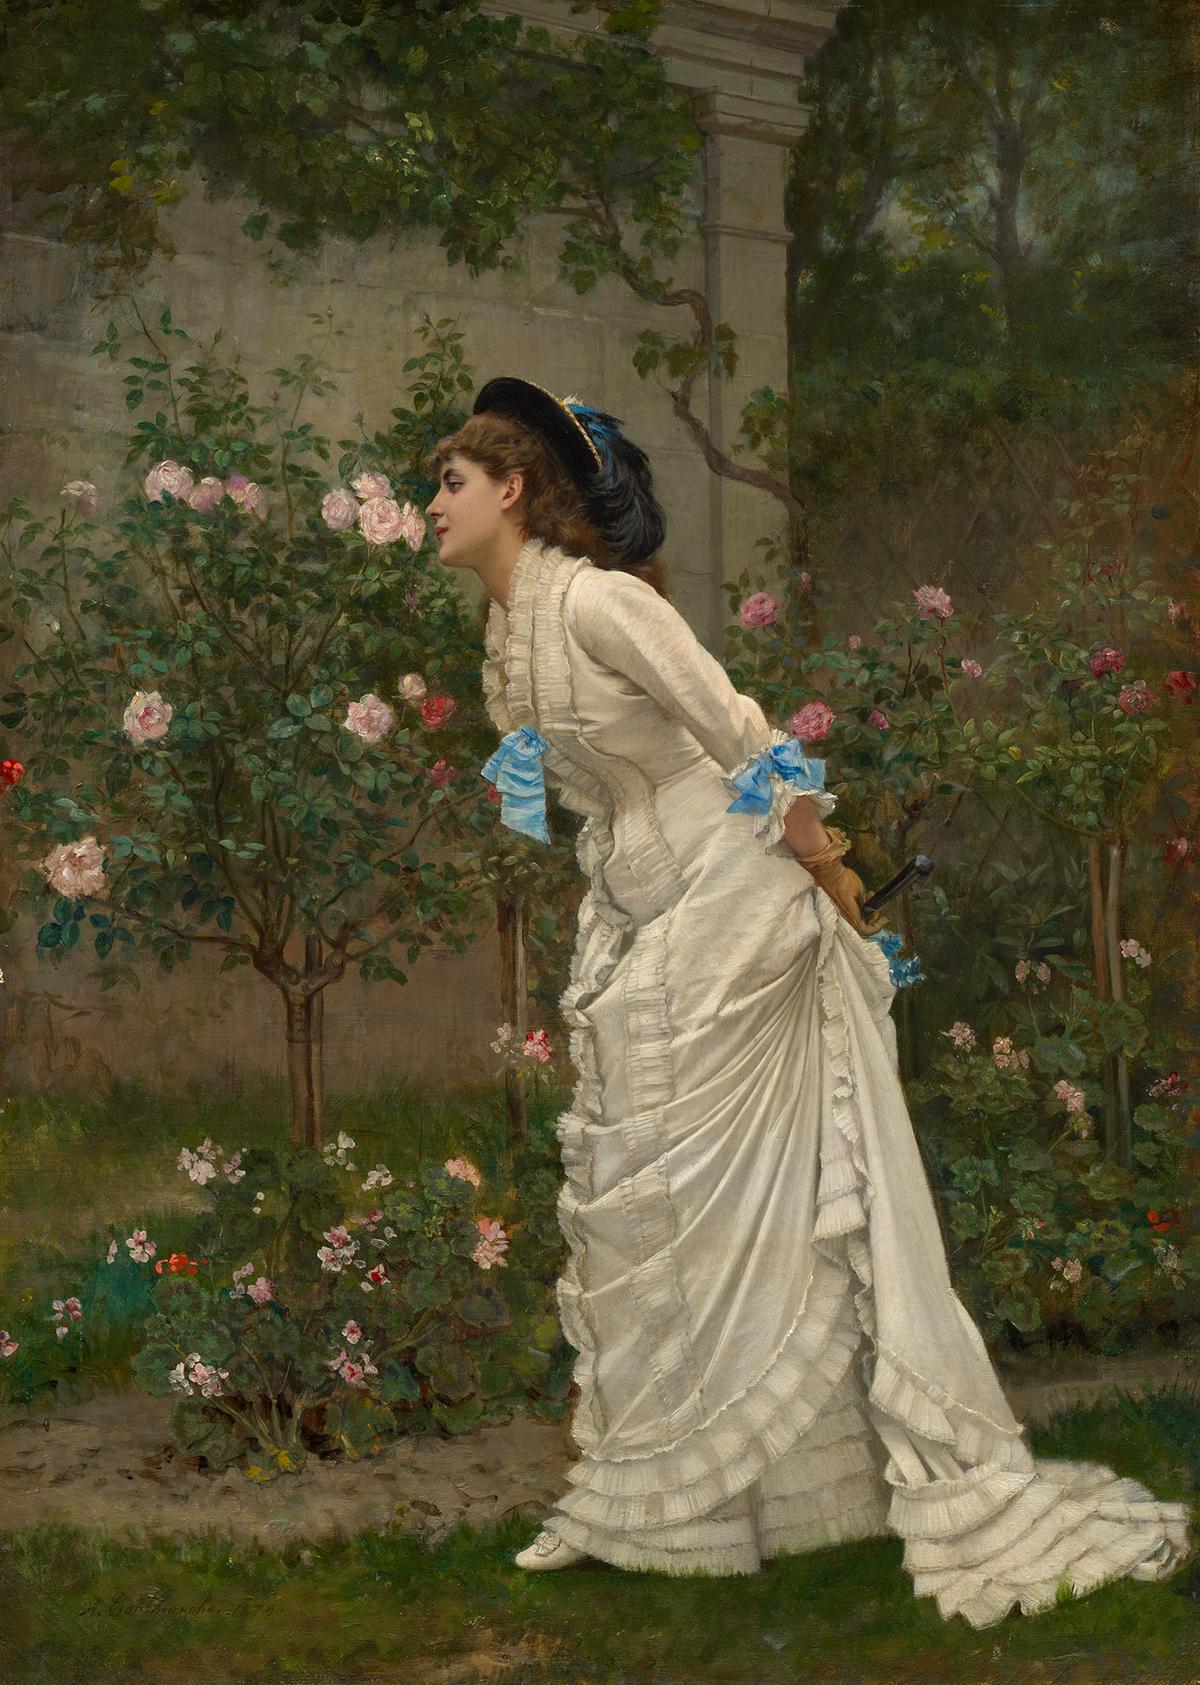 "Woman and Roses," 1879, by Auguste Toulmouche. Oil on canvas. Clark Art Institute, Williamstown, Mass. (Public Domain)